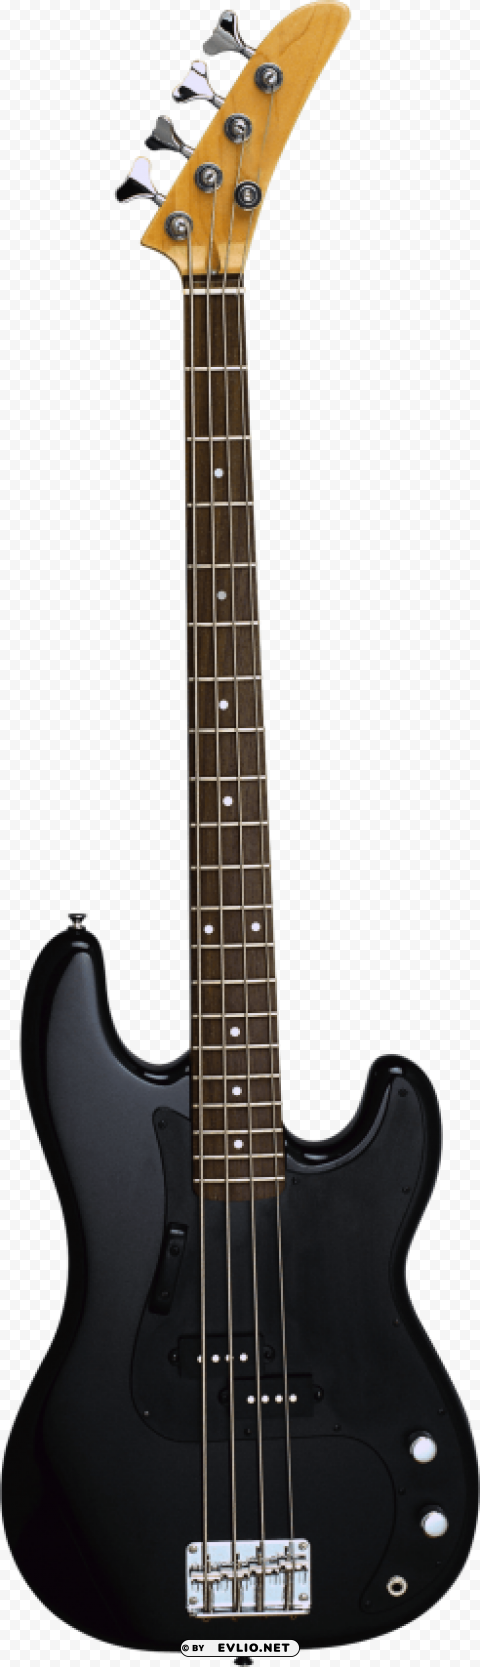 black electric guitar Transparent background PNG gallery